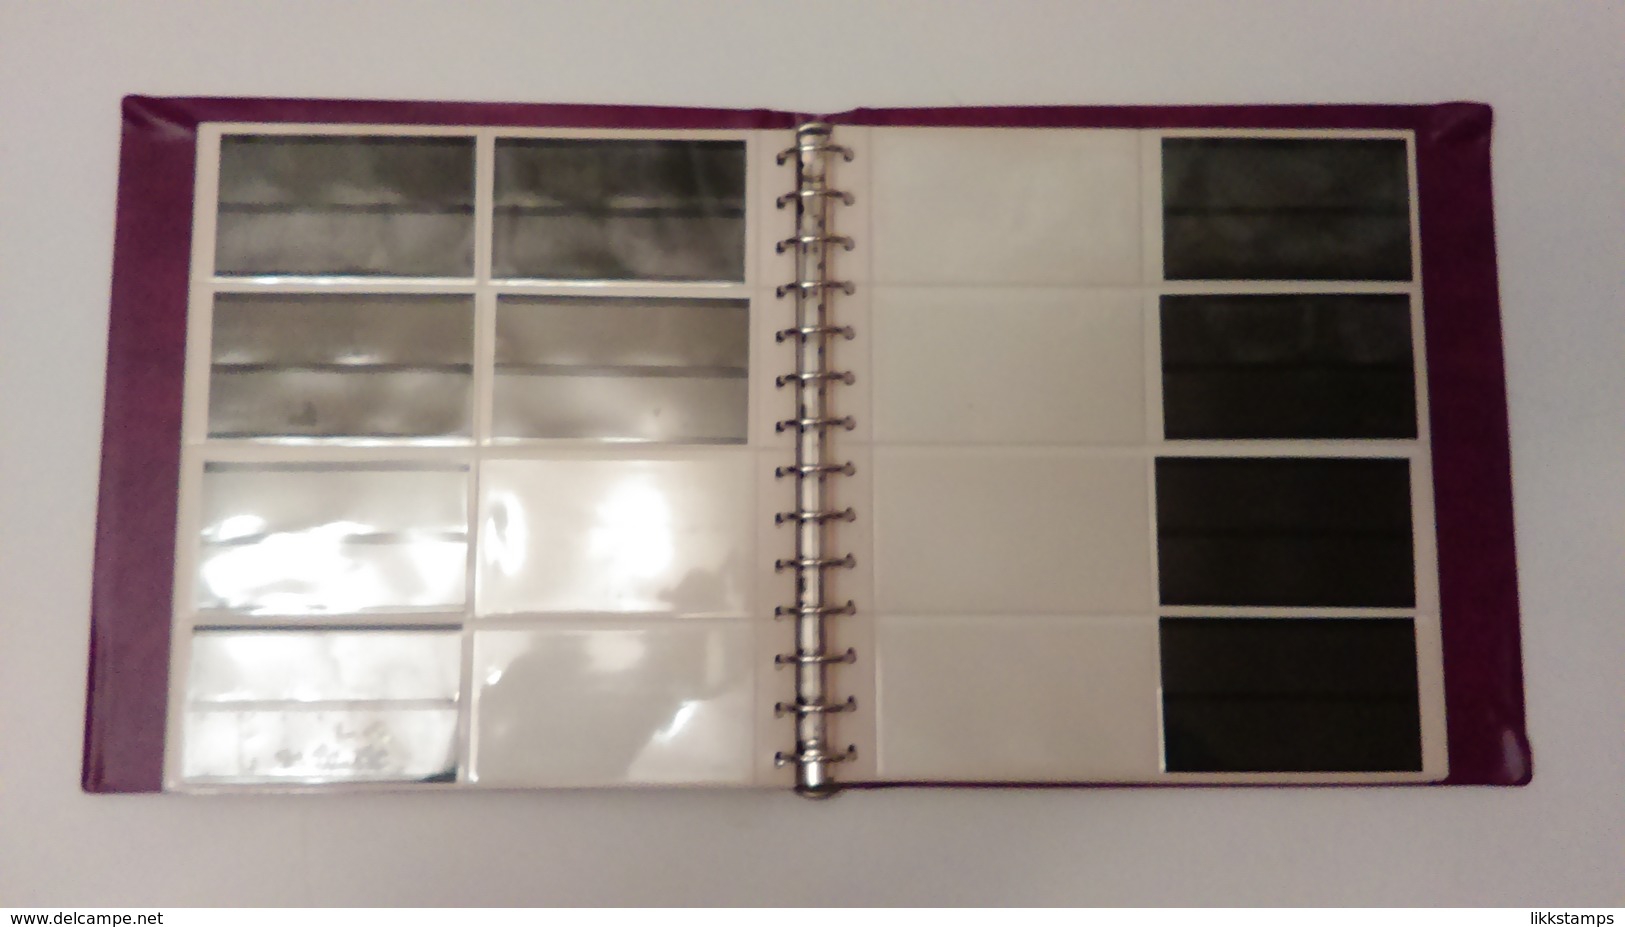 SAFE 14 RING BINDER CONTAINING 10 DEALERS APPROVAL CARD STOCKPAGES WITH CARDS #A00007 (B7)